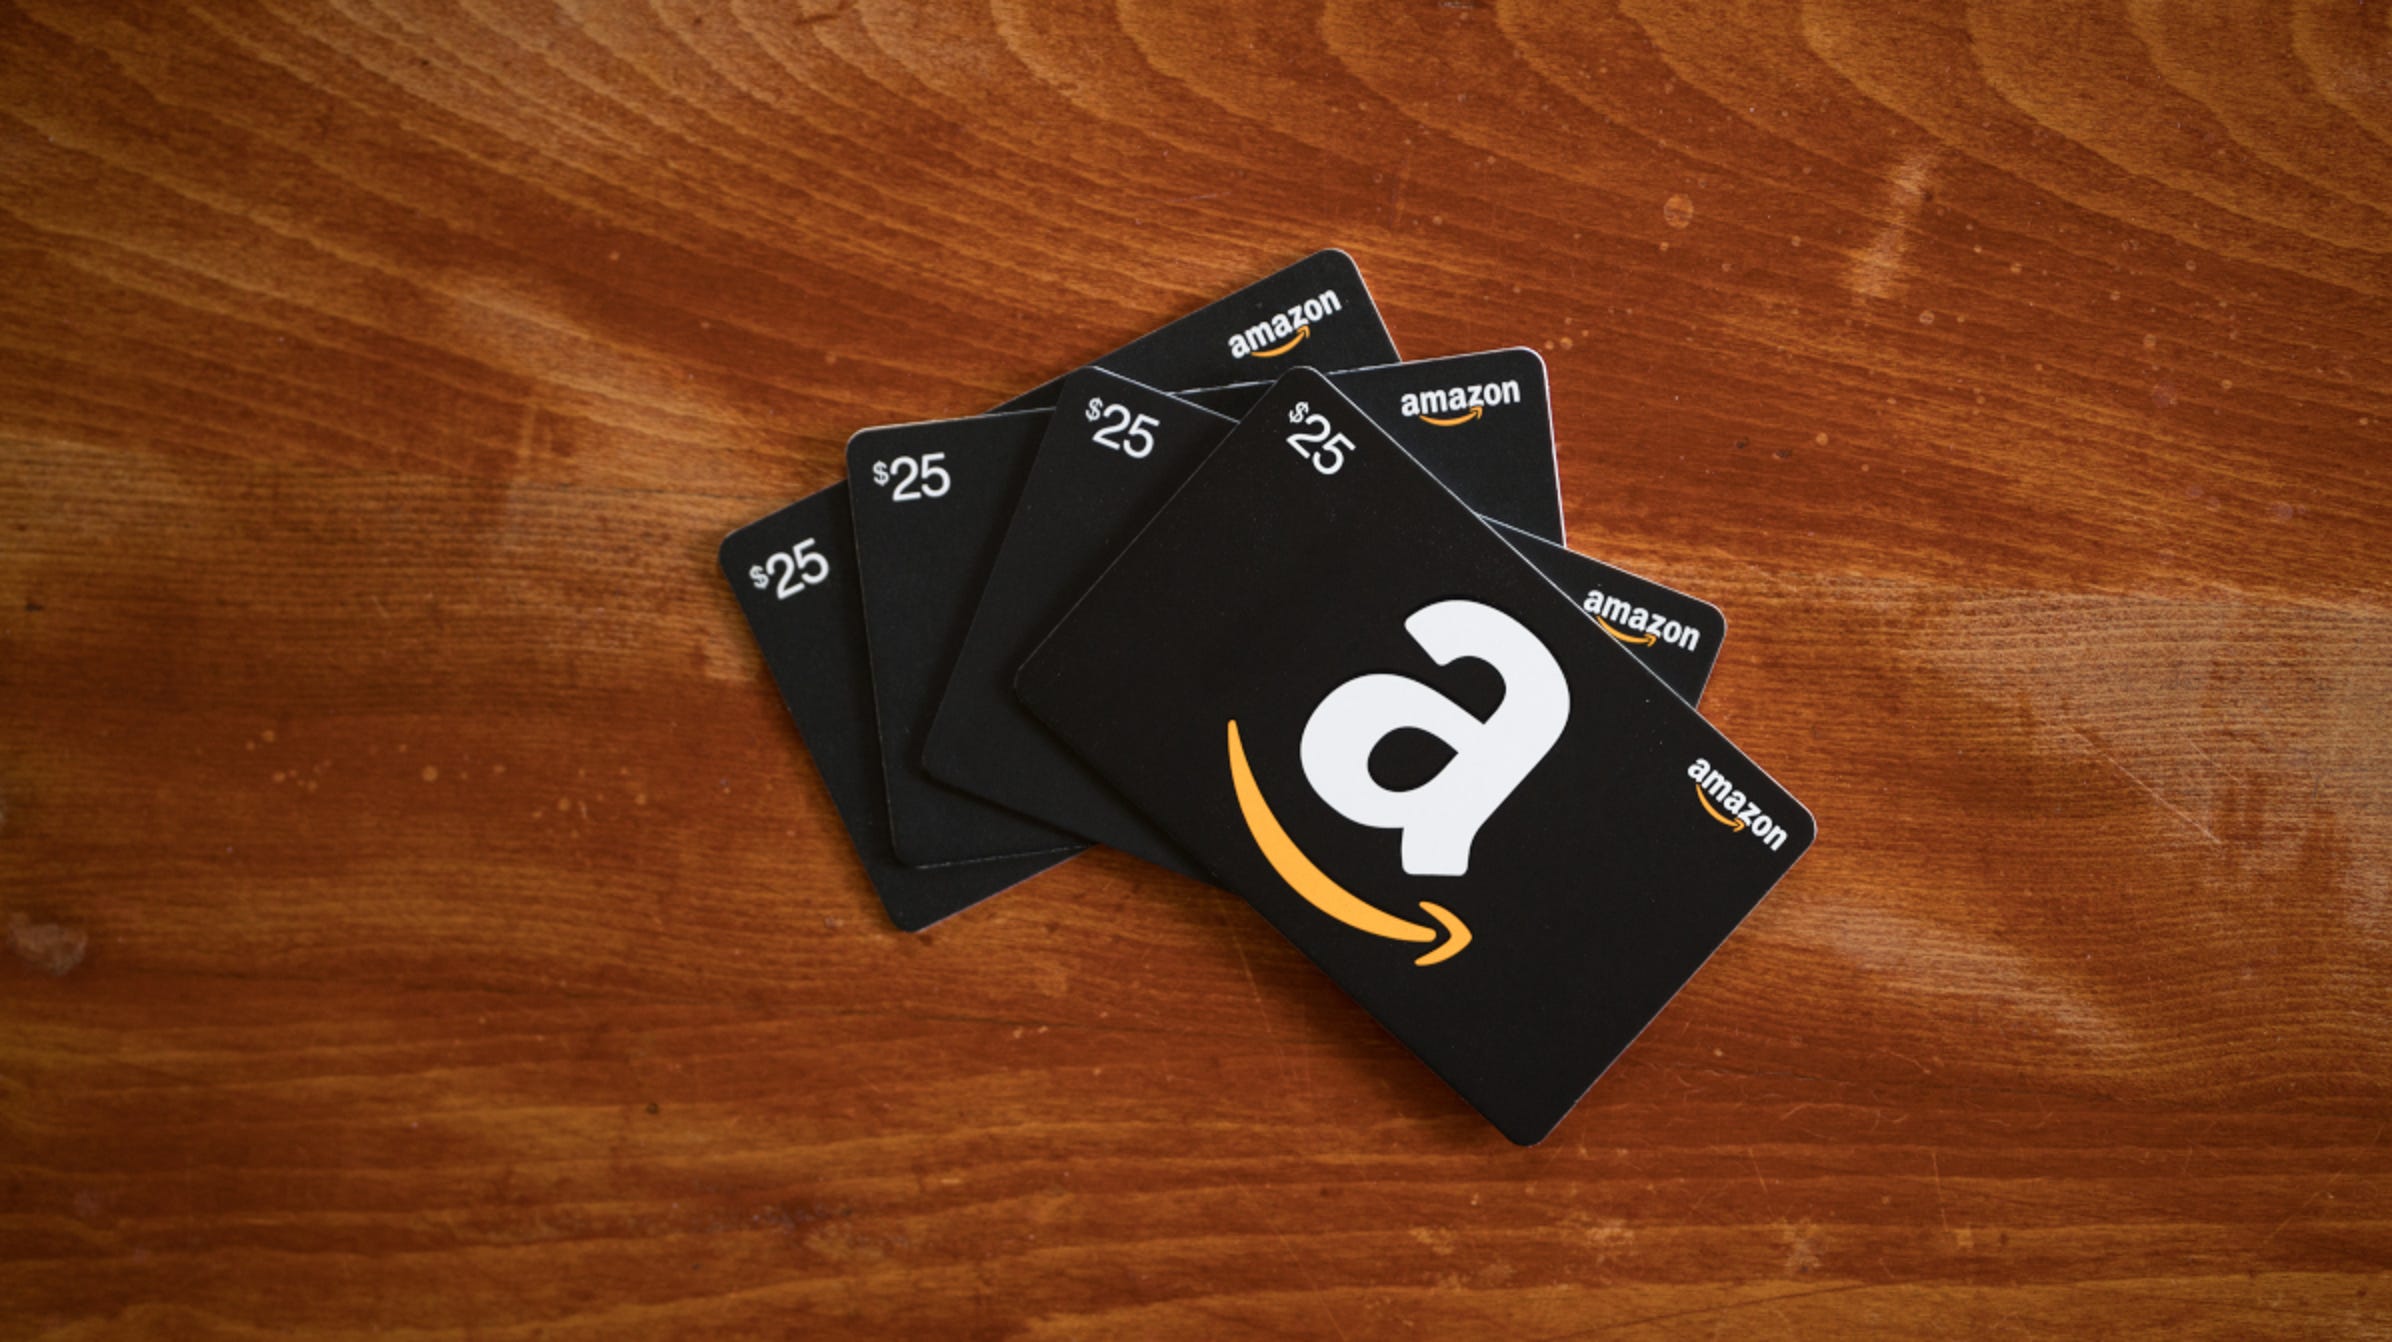 Read more about the article Can Amazon Gift Cards Be Redeemed Anywhere?<span class="rmp-archive-results-widget "><i class=" rmp-icon rmp-icon--ratings rmp-icon--star rmp-icon--full-highlight"></i><i class=" rmp-icon rmp-icon--ratings rmp-icon--star rmp-icon--full-highlight"></i><i class=" rmp-icon rmp-icon--ratings rmp-icon--star rmp-icon--full-highlight"></i><i class=" rmp-icon rmp-icon--ratings rmp-icon--star rmp-icon--full-highlight"></i><i class=" rmp-icon rmp-icon--ratings rmp-icon--star rmp-icon--half-highlight js-rmp-replace-half-star"></i> <span>4.6 (40)</span></span>